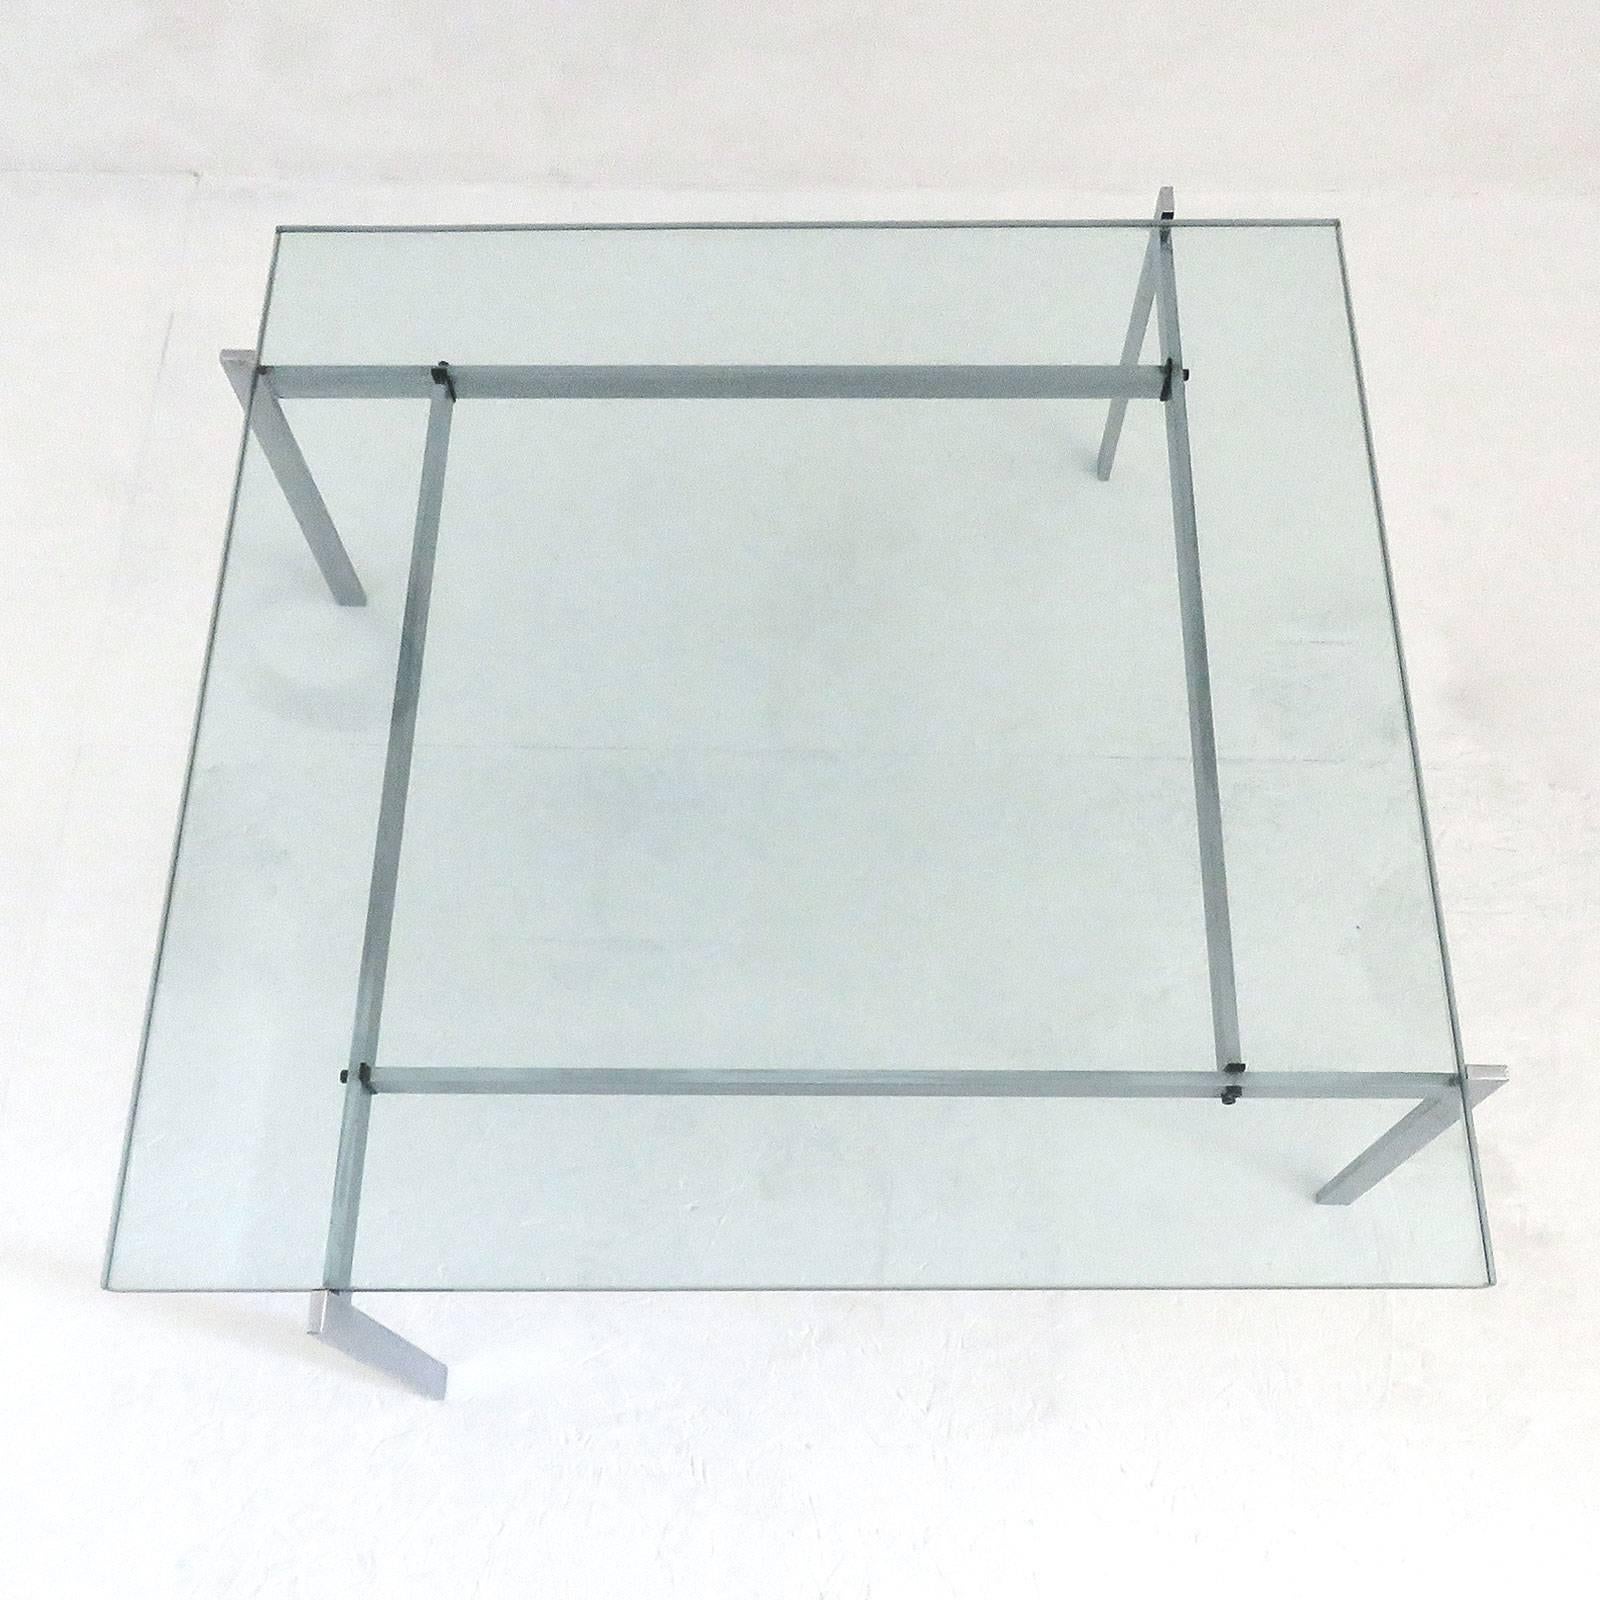 Iconic early version PK-61 coffee table, designed by Poul Kjærholm, 1969 for E. Kold Christensen, Denmark, 1956-1981 in brushed, chromium-plated steel with glass top, marked with EKC logo.